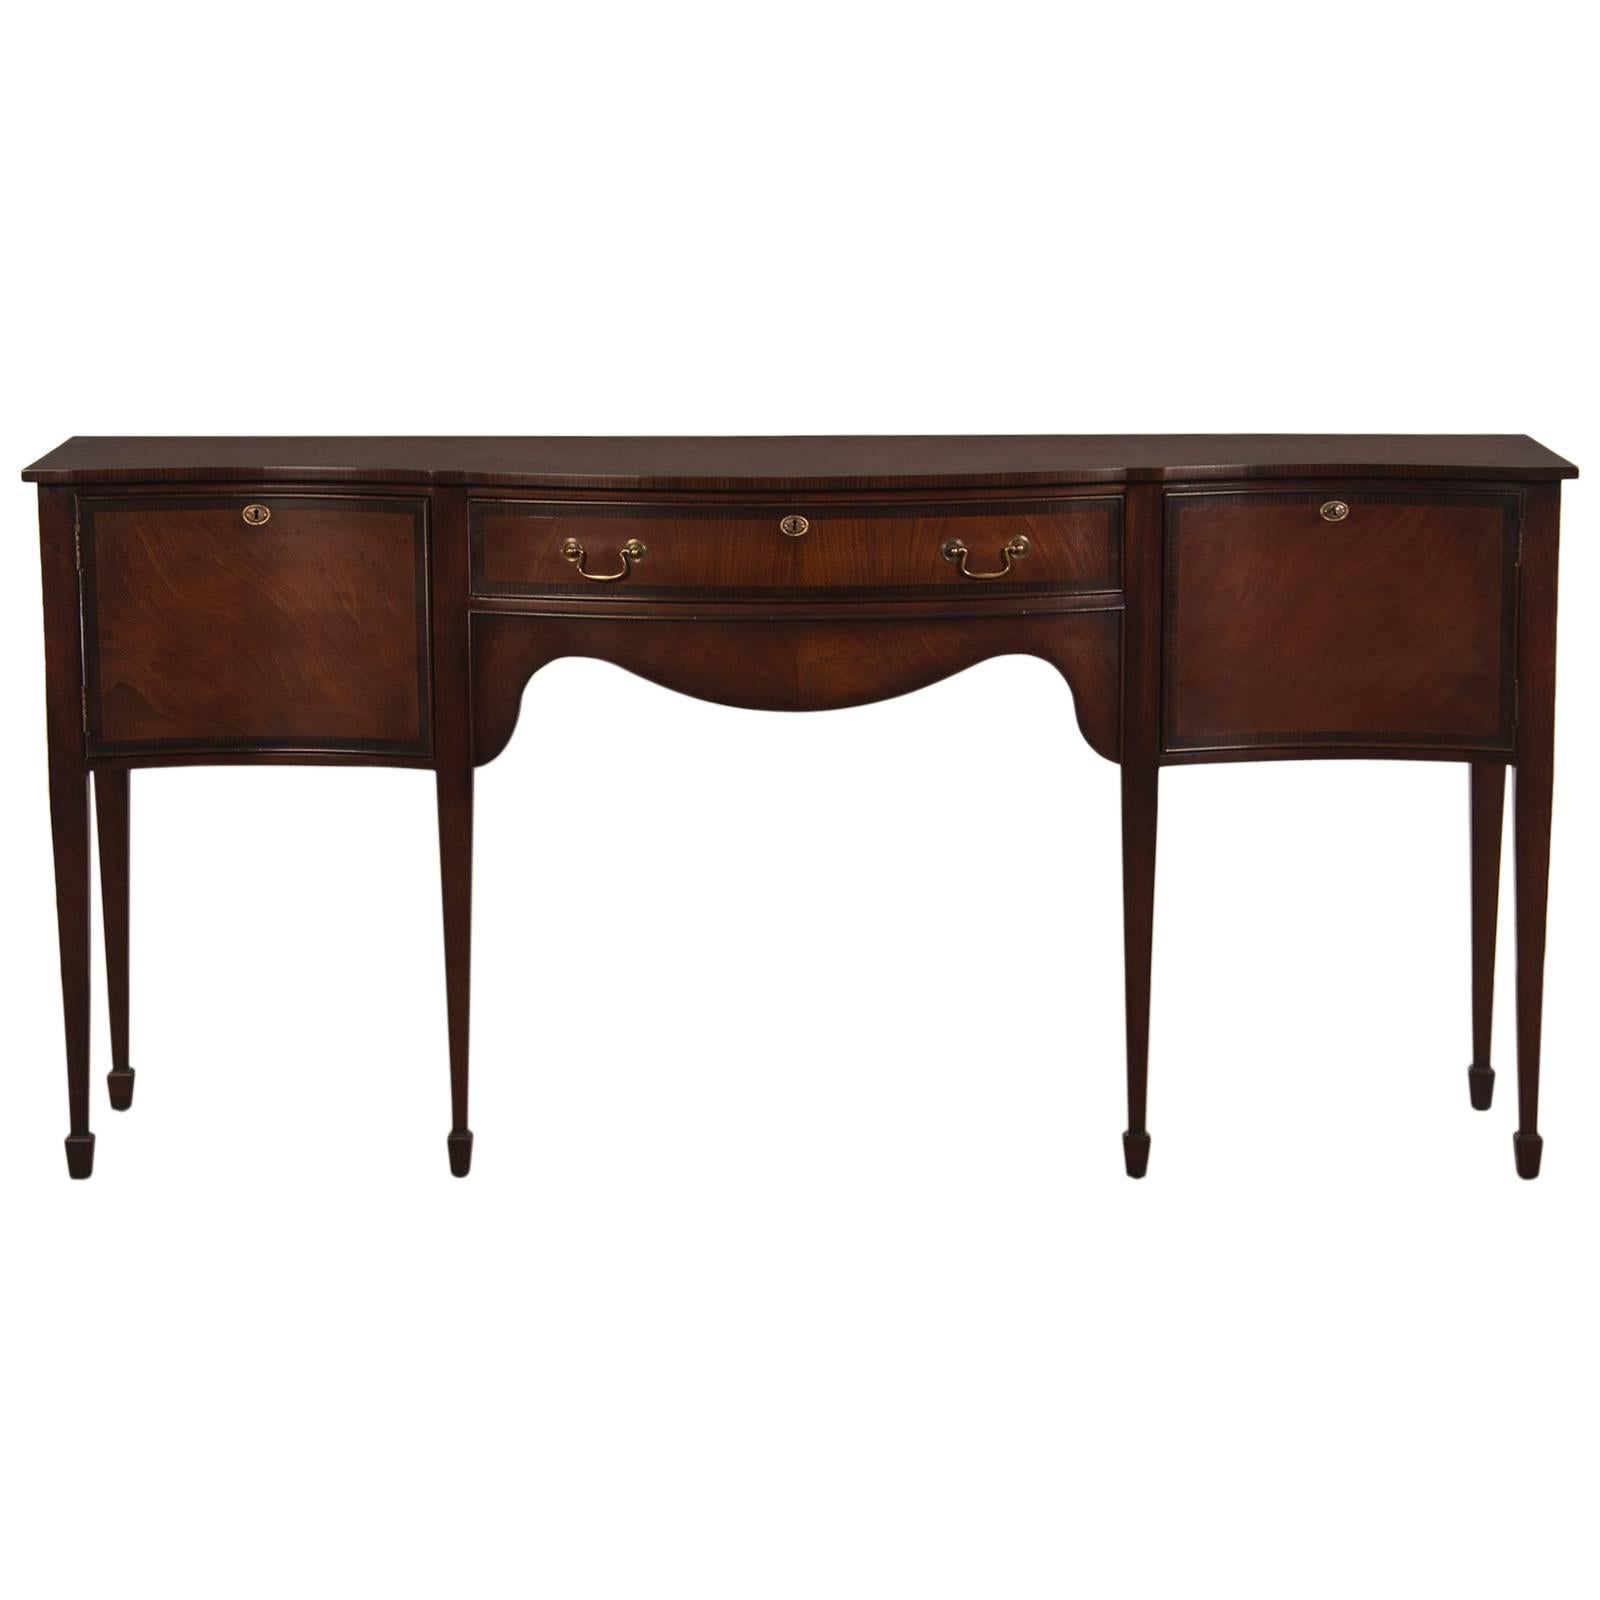 Sheraton Style Serpentine Front Mahogany Sideboard Crossbanded with Rosewood For Sale